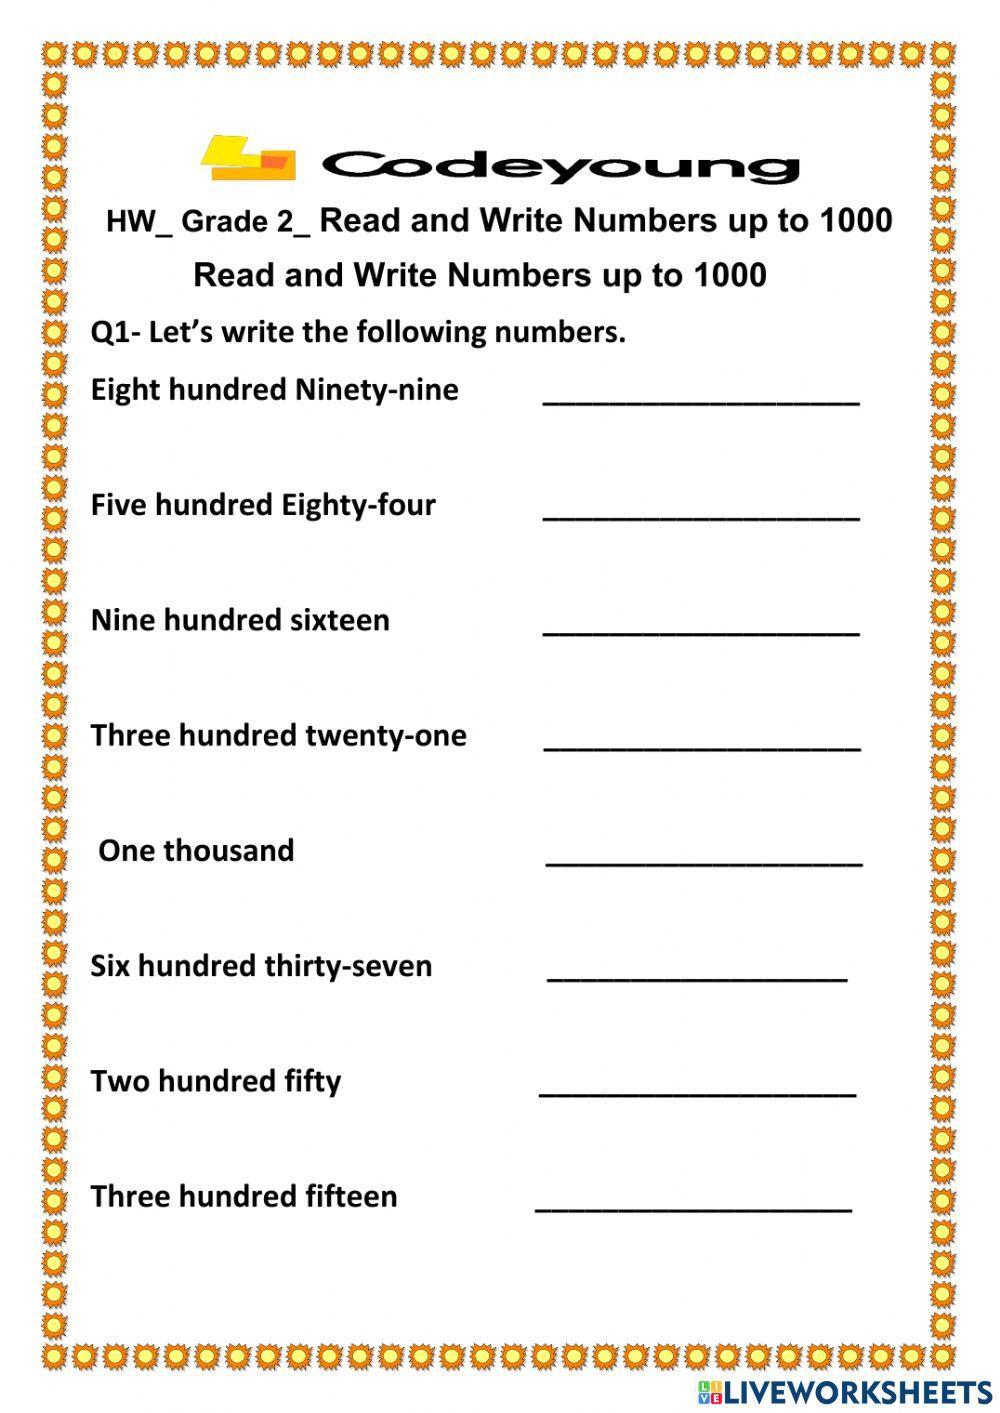 read-and-write-numbers-up-to-1000-activity-live-worksheets